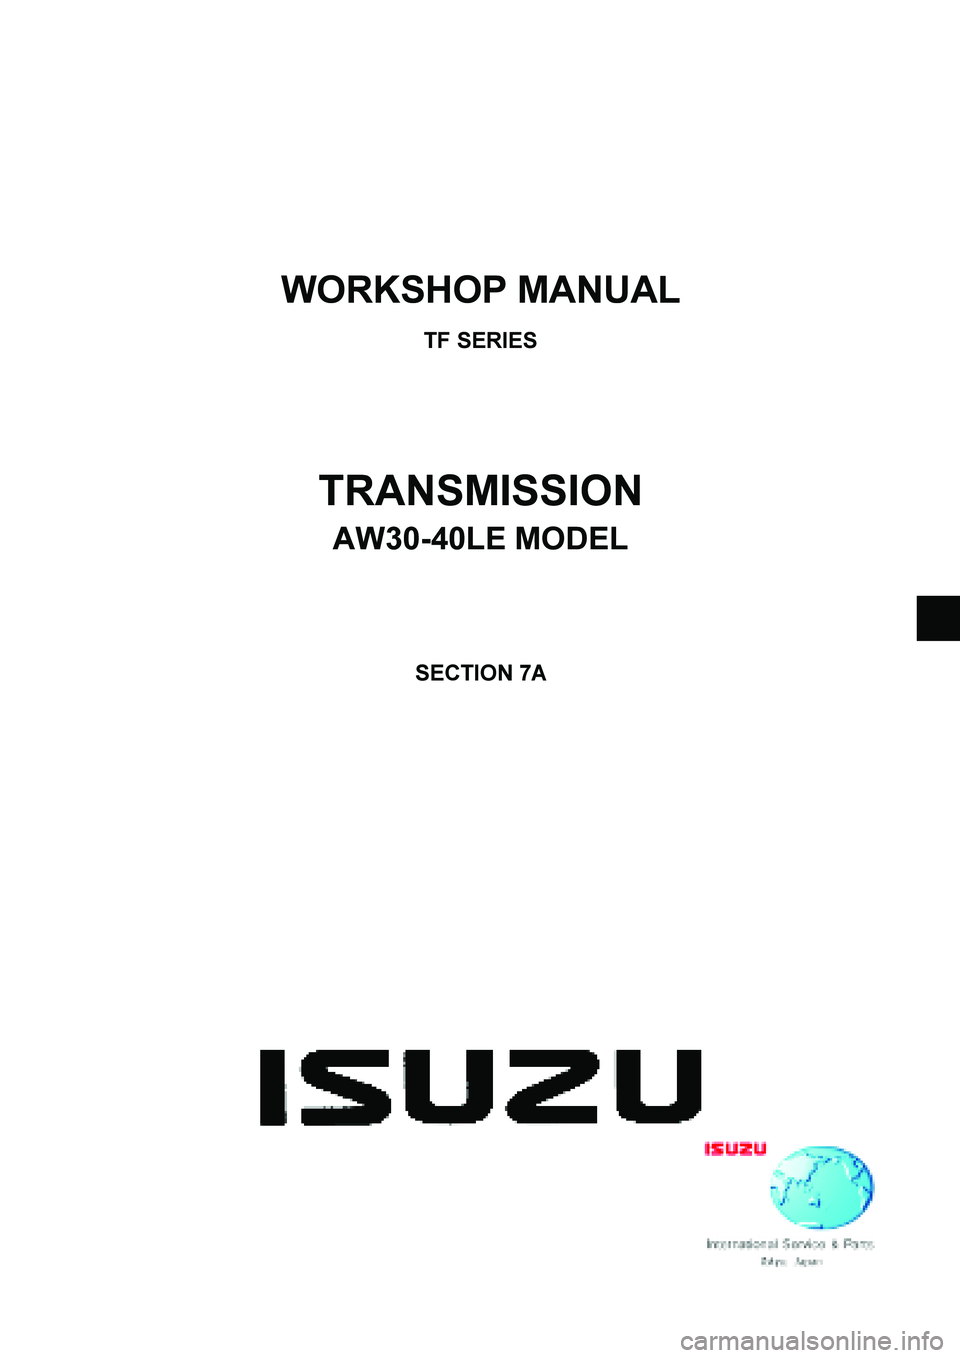 ISUZU TF SERIES 2004  Workshop Manual  
 
 
WORKSHOP MANUAL 
TF SERIES 
TRANSMISSION 
AW30-40LE MODEL 
SECTION 7A 
  